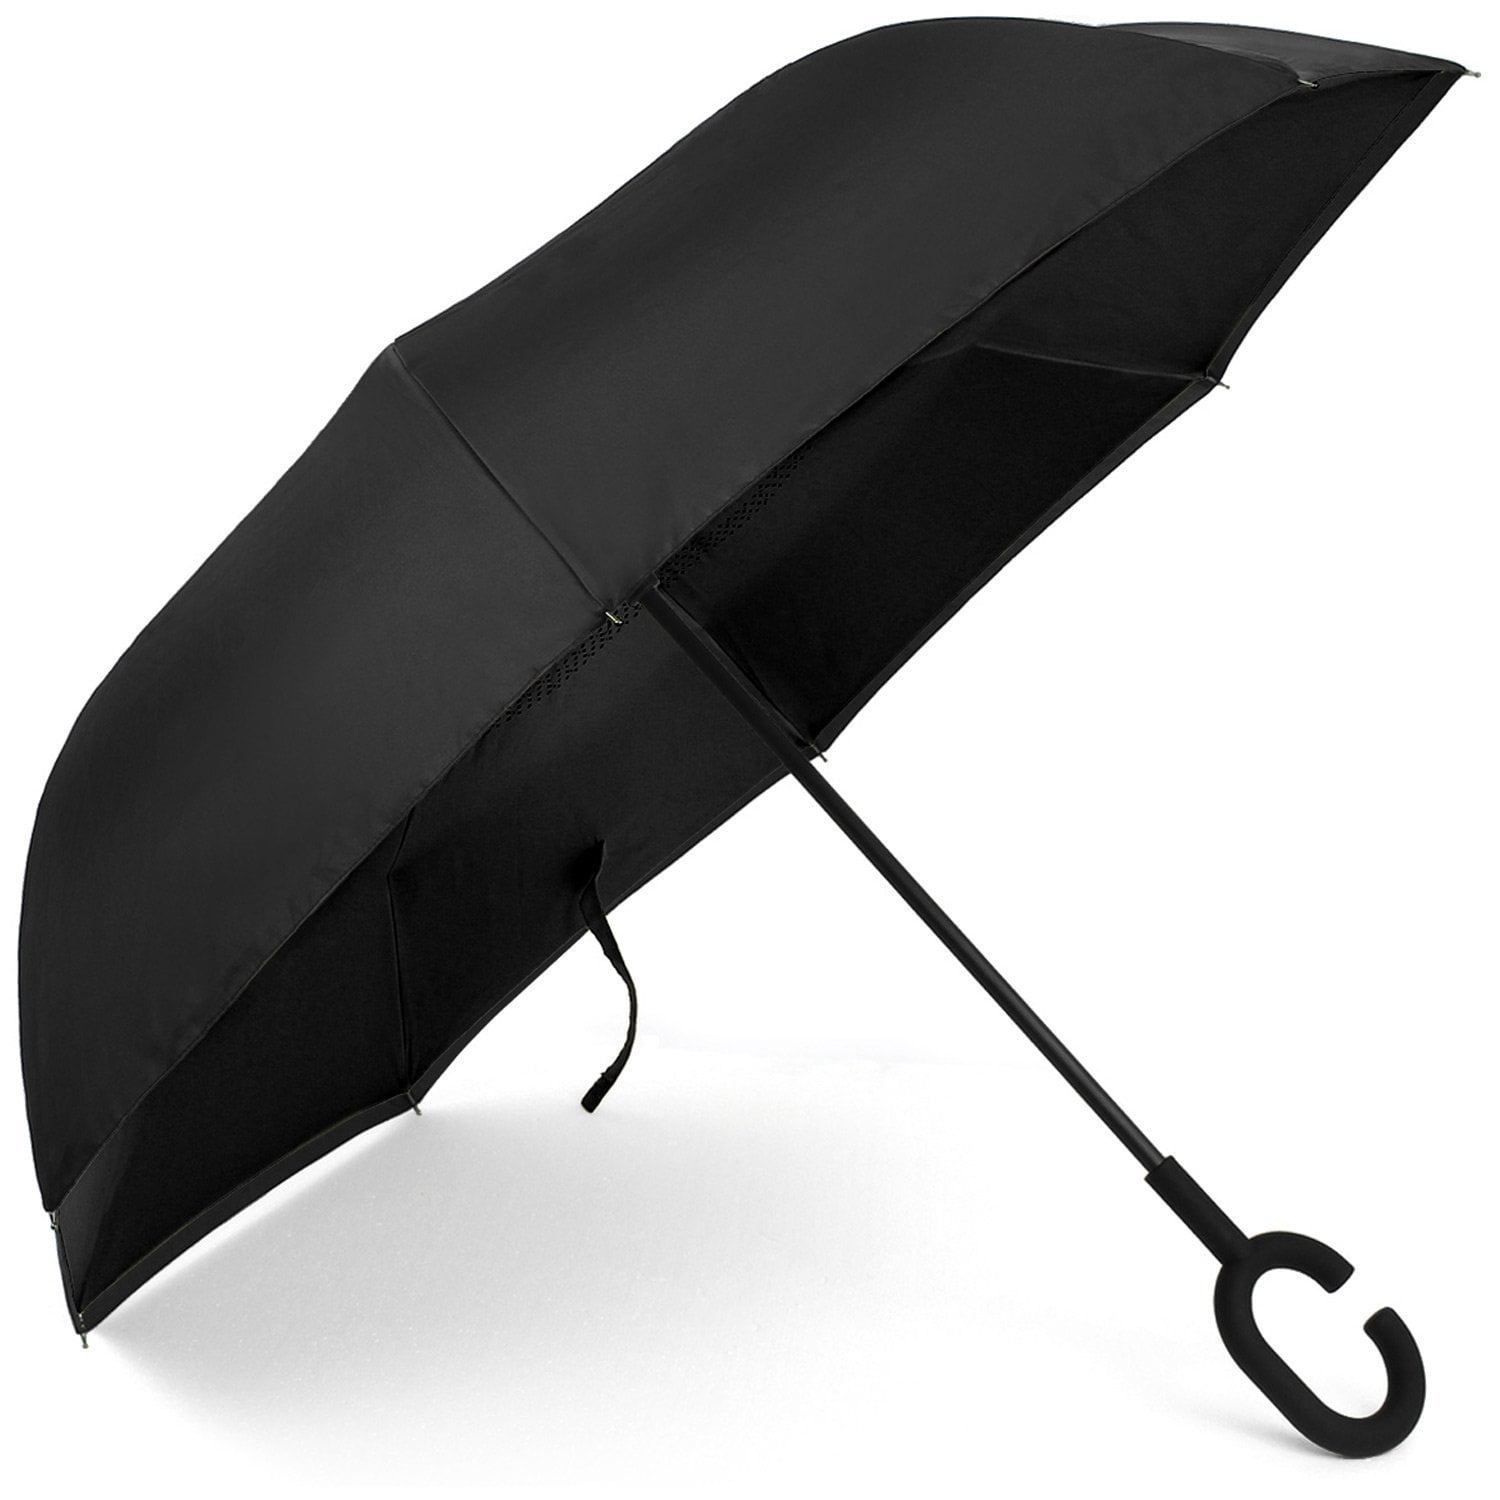 Classy Inverted Reverse Close Umbrella Carrying Bag Included Easy Auto-Open Self-Standing with Hands Free C-Shaped Handle Double Layer with Safety Reflective Strip.Color-Black Outside/Black Inside 